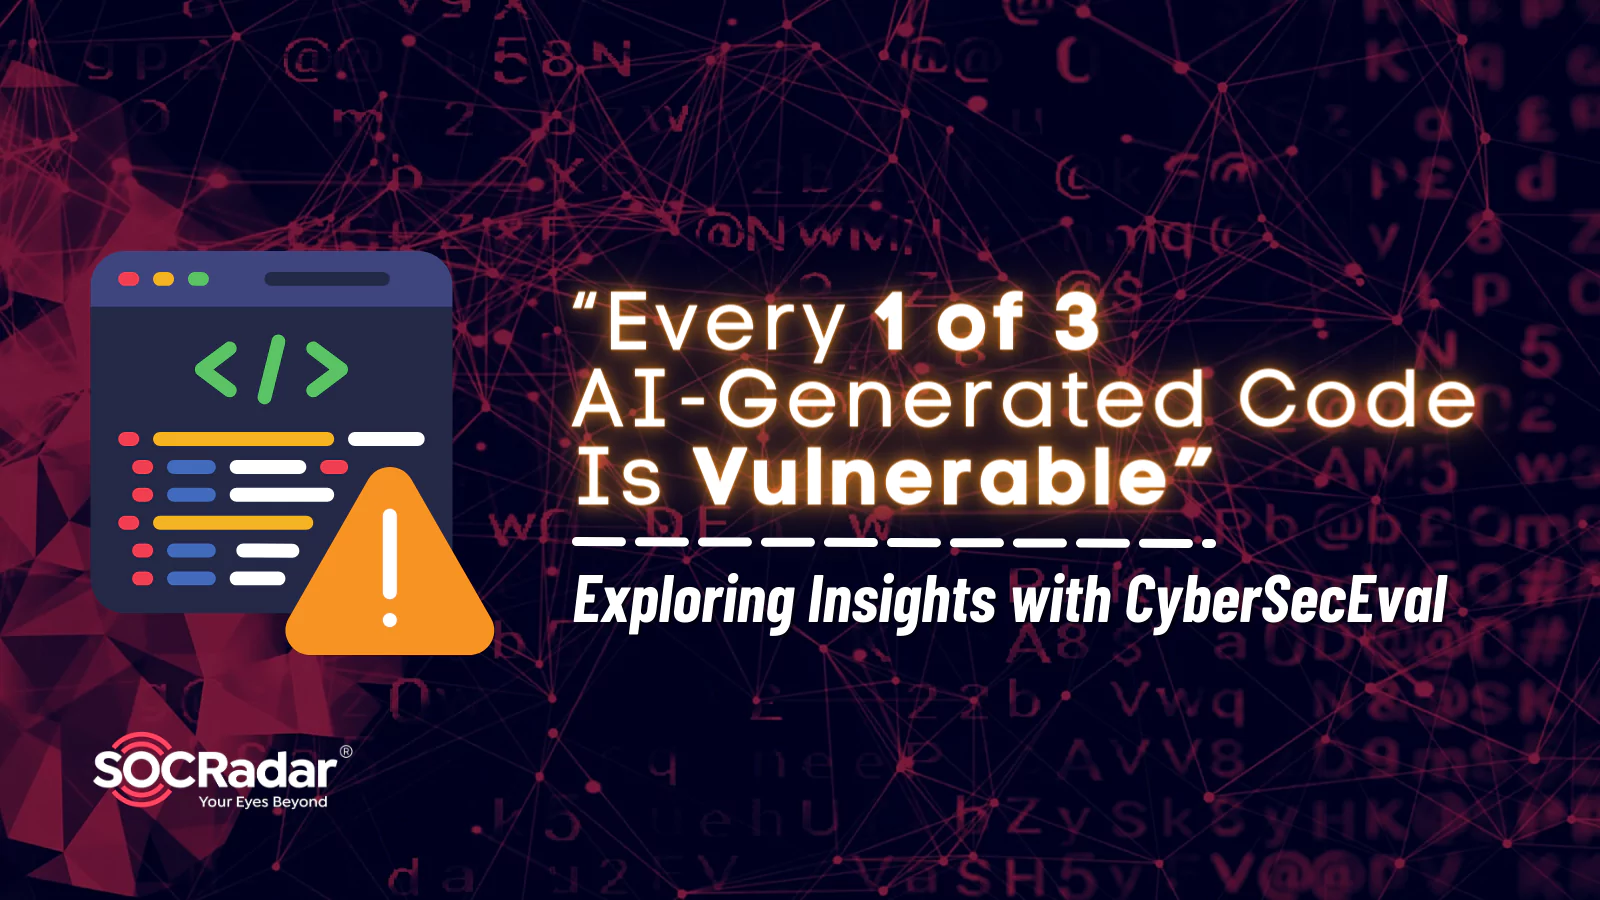 SOCRadar® Cyber Intelligence Inc. | Every 1 of 3 AI-Generated Code Is Vulnerable: Exploring Insights with CyberSecEval